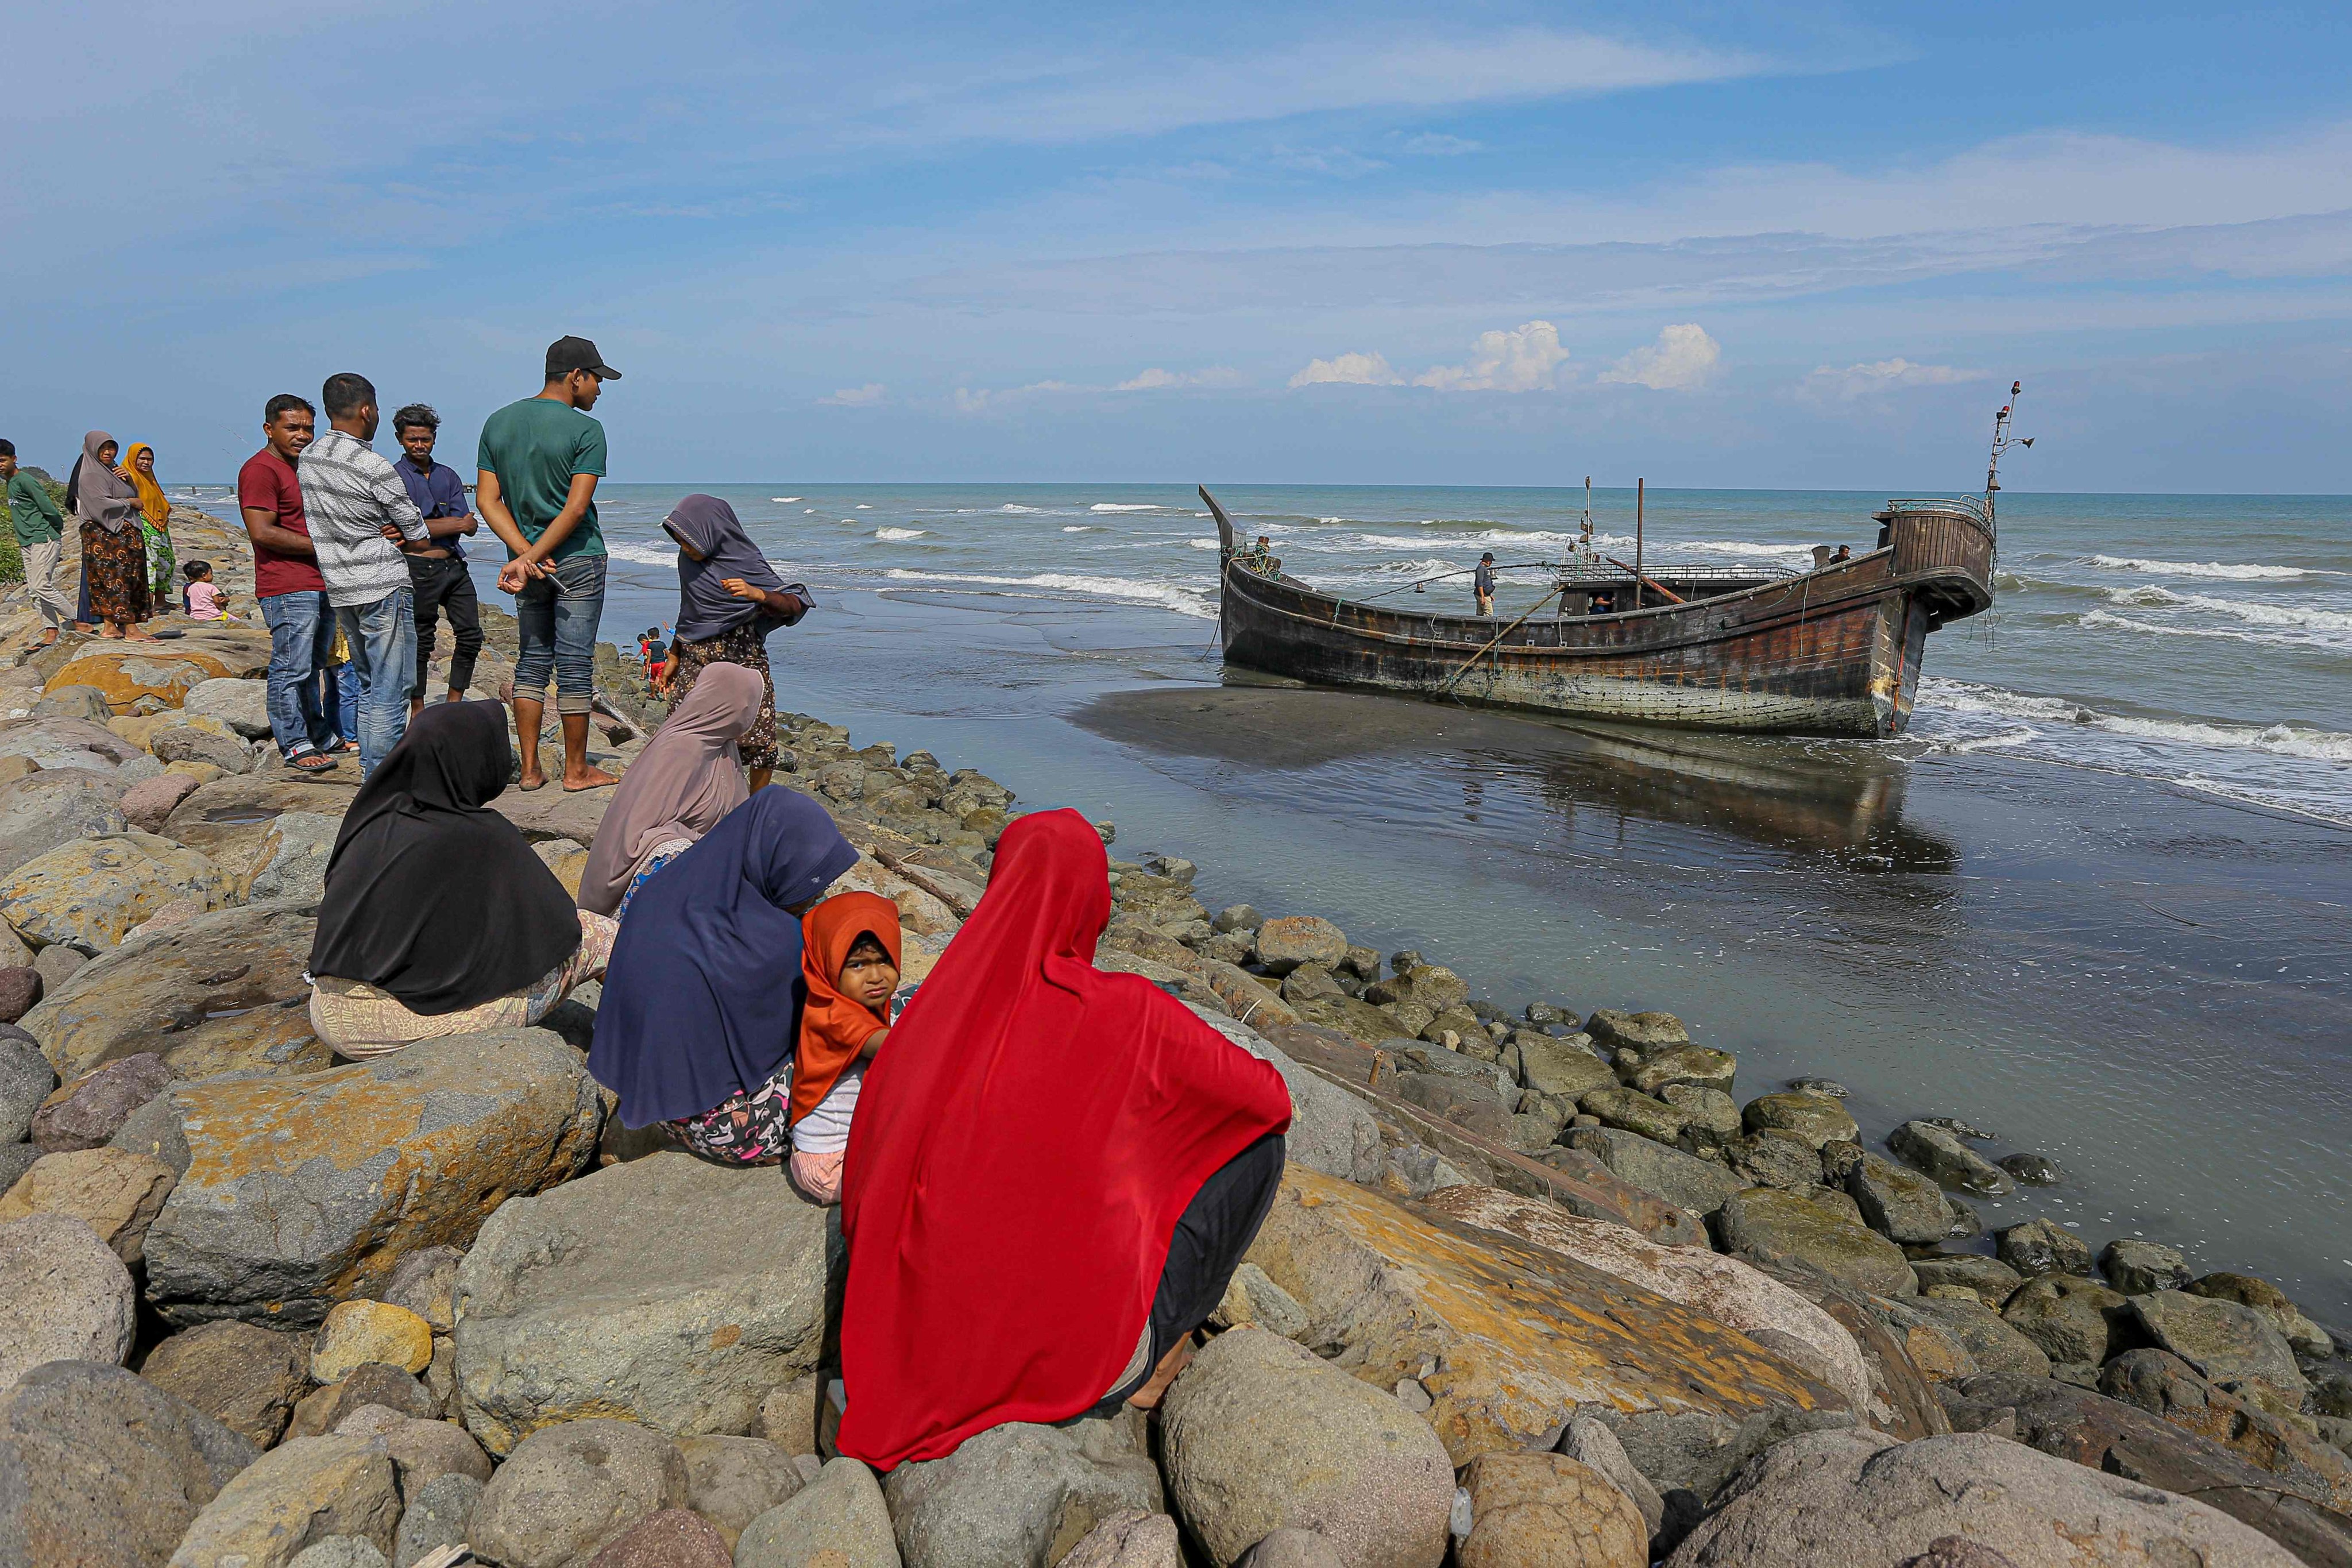 Villagers look at a wooden boat used by Rohingya people in Pidie, Aceh province on December 27, 2022. Photo: AFP